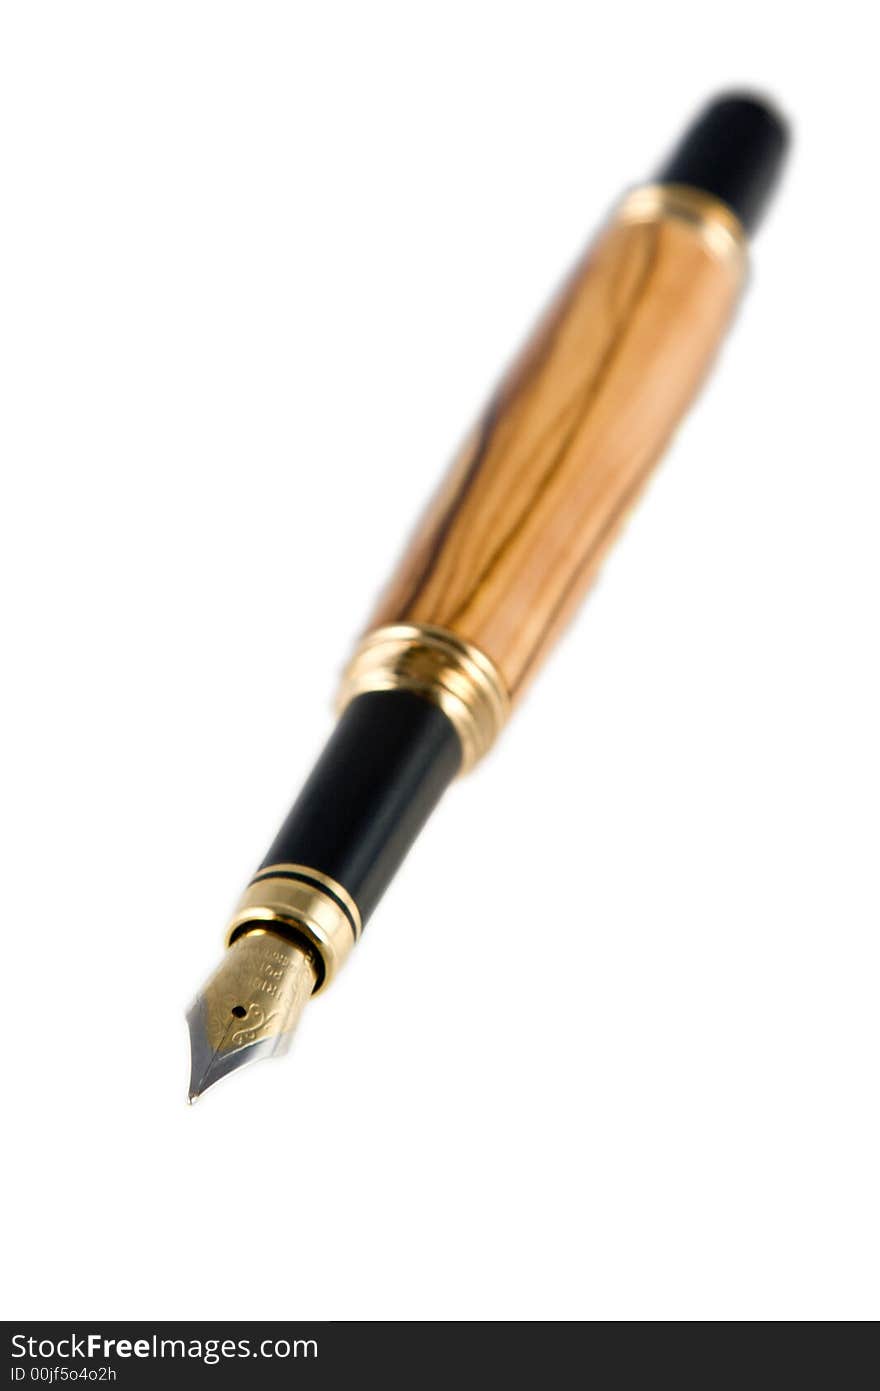 A handmade fountain pen displayed on white with a shallow depth of field (dof). The pen is made from Bethlehem Olive Wood. (The pen was handmade by the photographer in his studio). A handmade fountain pen displayed on white with a shallow depth of field (dof). The pen is made from Bethlehem Olive Wood. (The pen was handmade by the photographer in his studio).